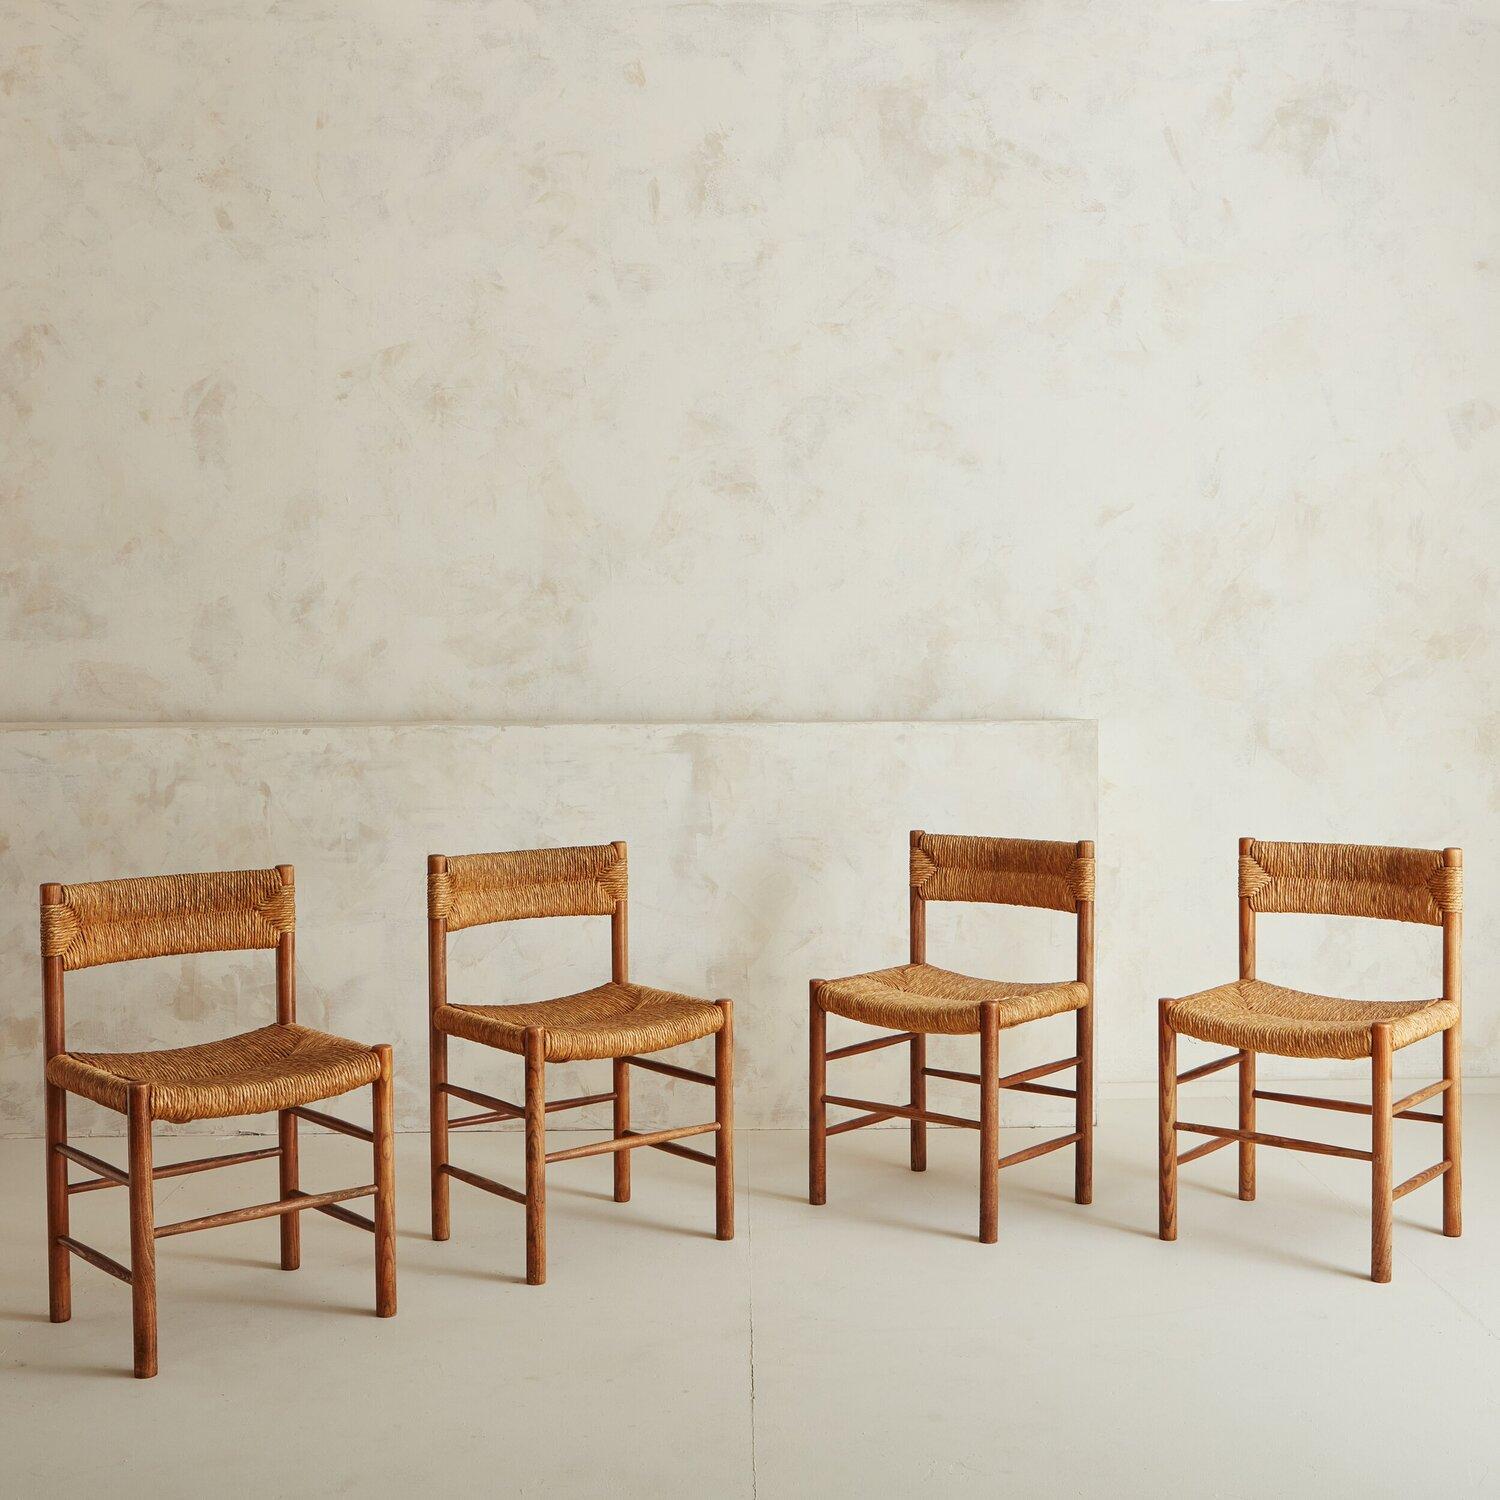 A set of four Rush and Wood ‘Dordogne’ chairs in the style of Robert Sentou. These chairs boast a harmony in materials, construction and design. These chairs are thoughtfully crafted of solid wood and rush. France, 1950s.